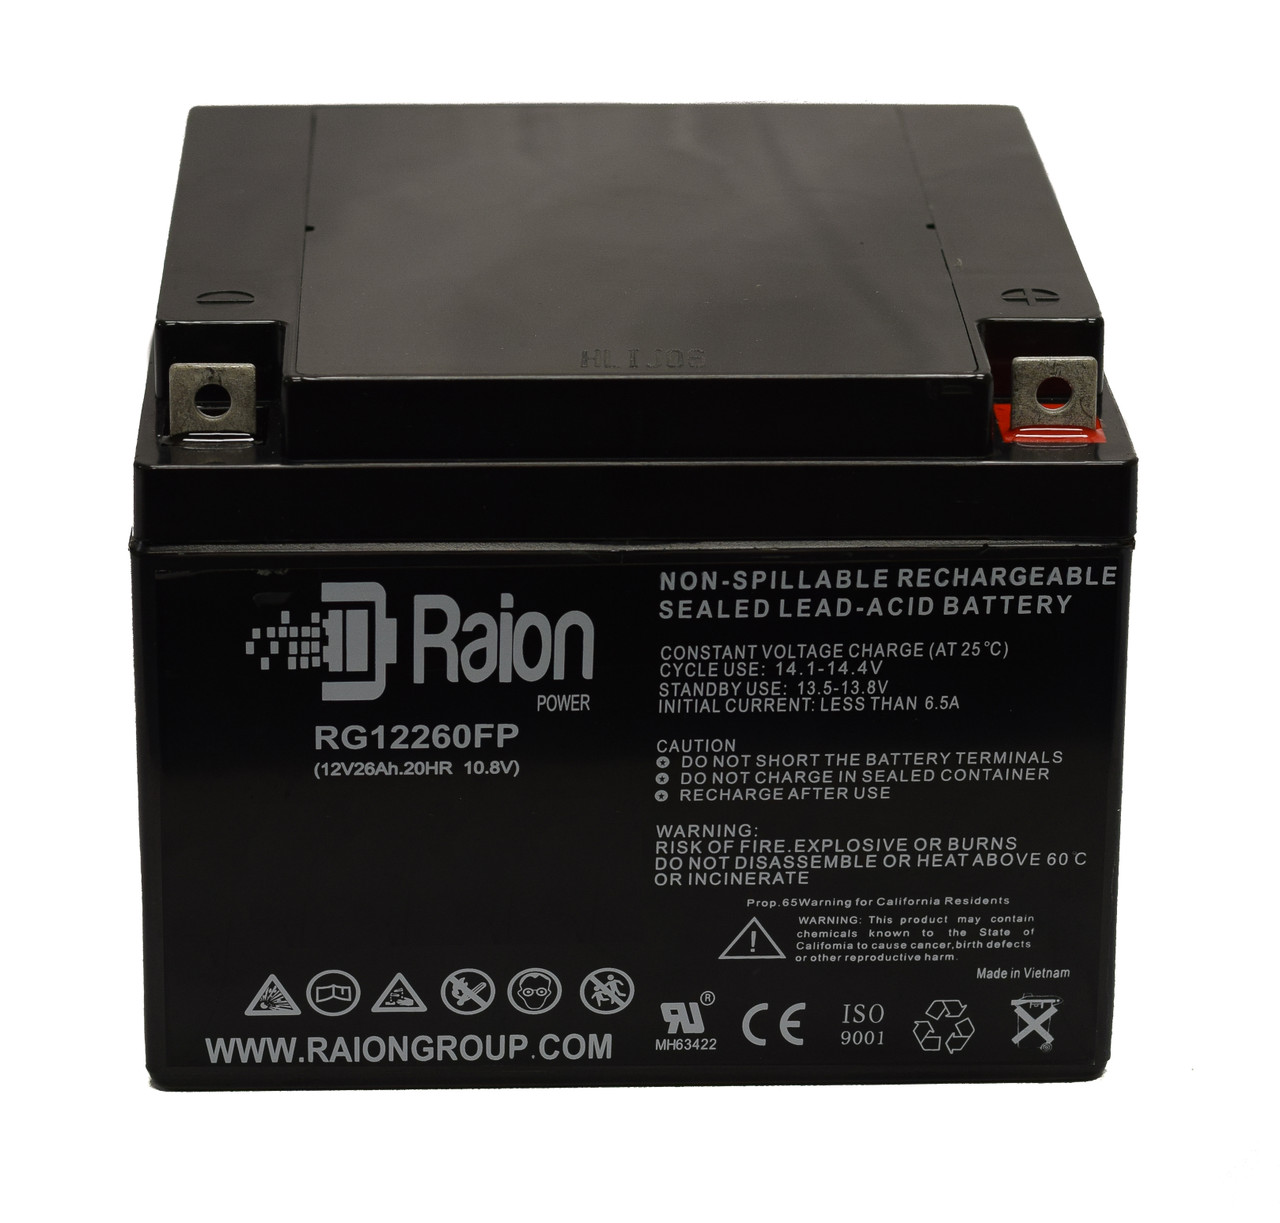 Raion Power RG12260FP 12V 26Ah Lead Acid Battery for Airborne Life Support Systems Infant Transport Incubator 20H